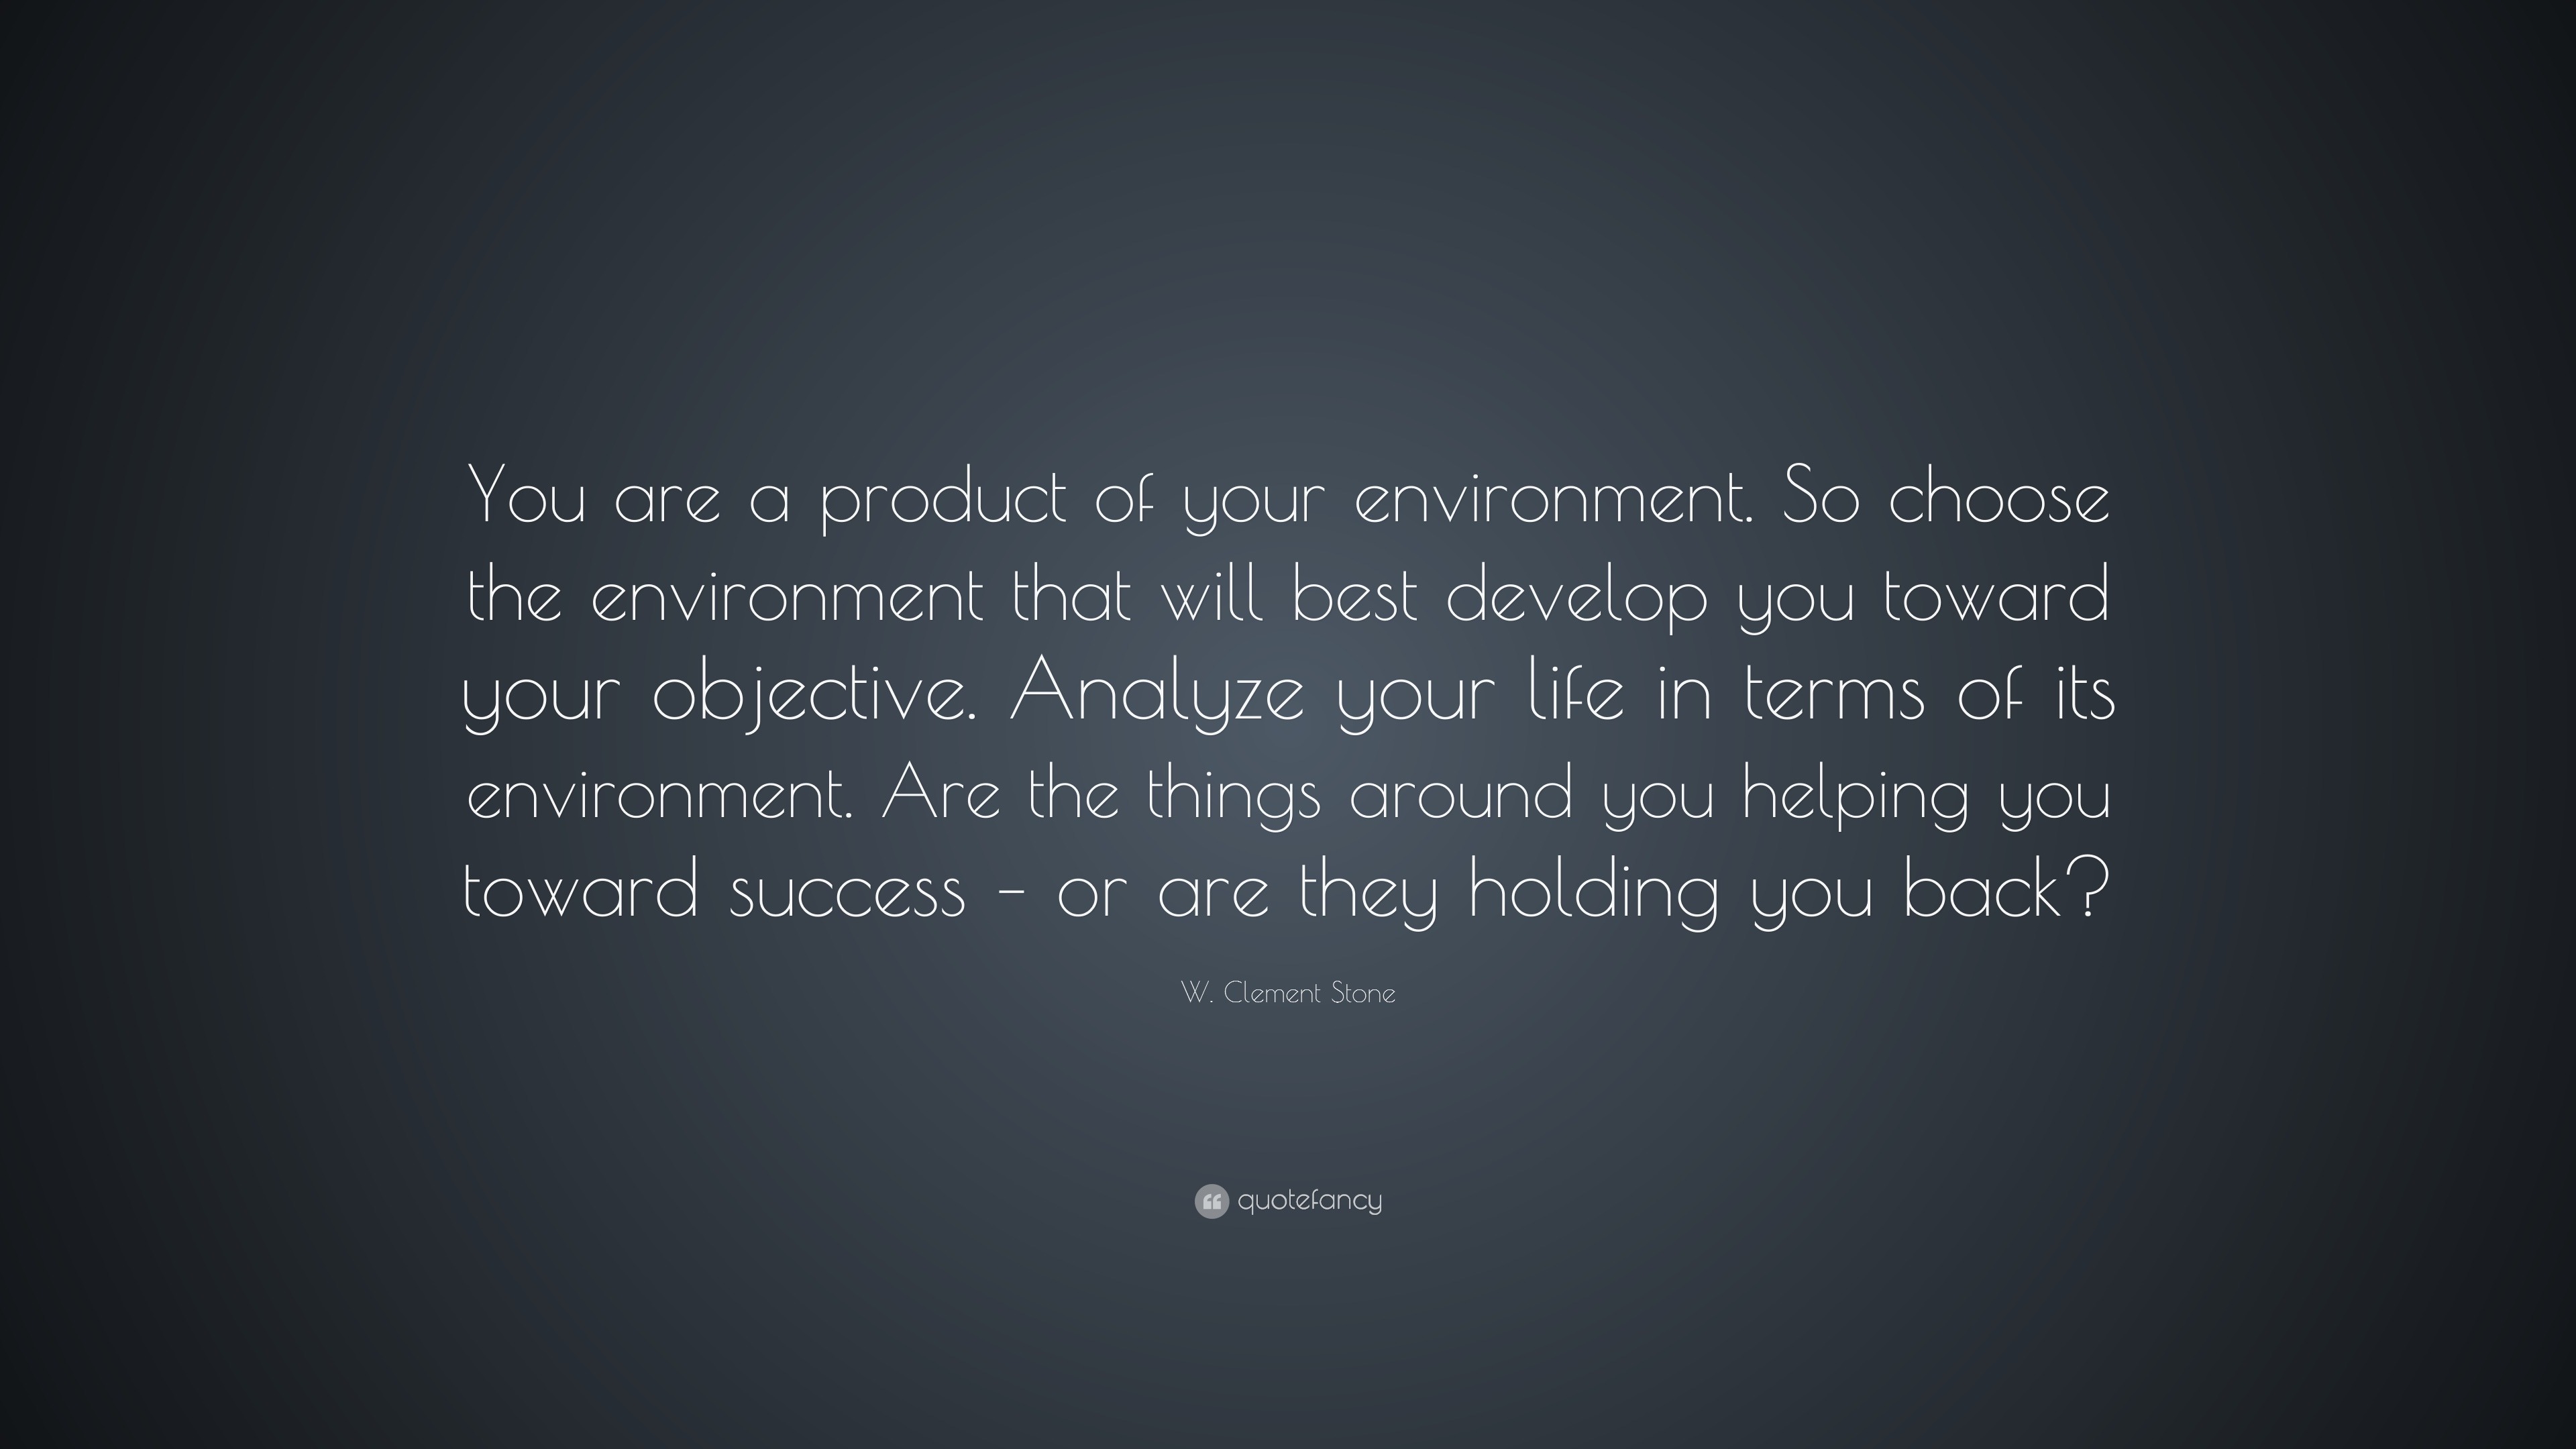 W. Clement Stone Quote: “You are a product of your environment. So